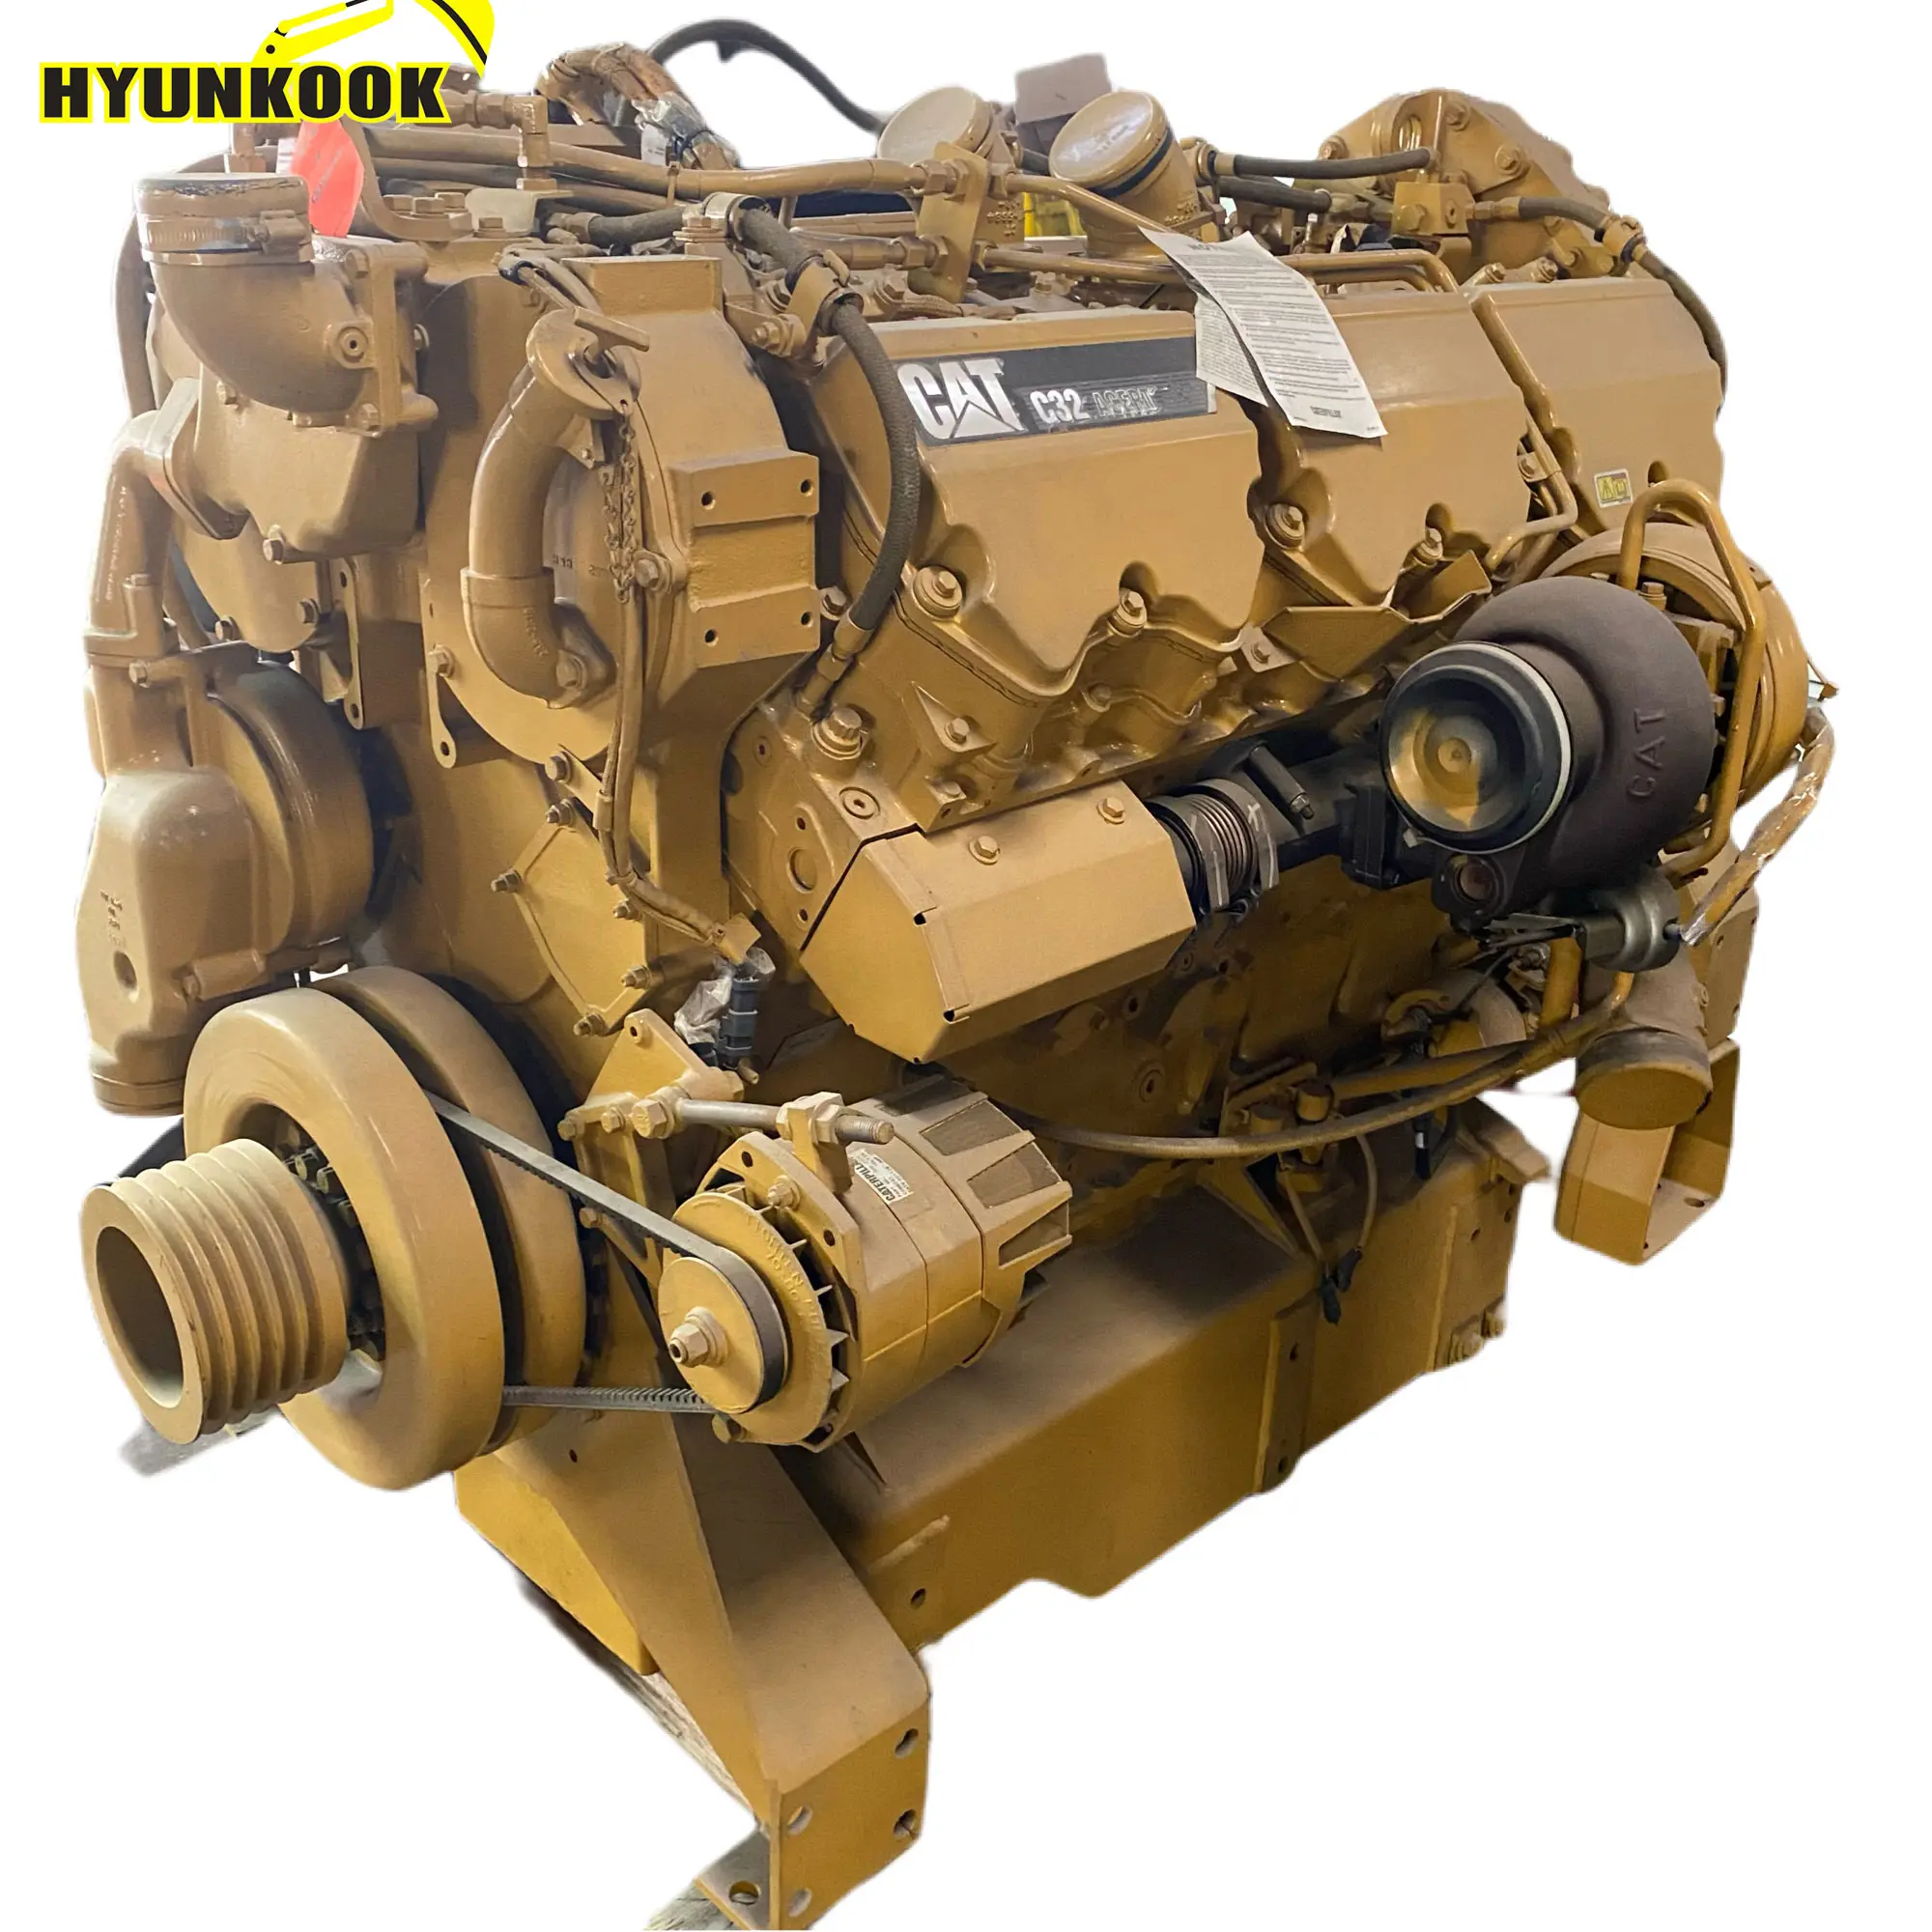 Second hand c32 industrial engine assy D11T 253-0616 2530616 320-3060 3203060 2959085 295-9085 3740750 374-0750 for Cat dozer